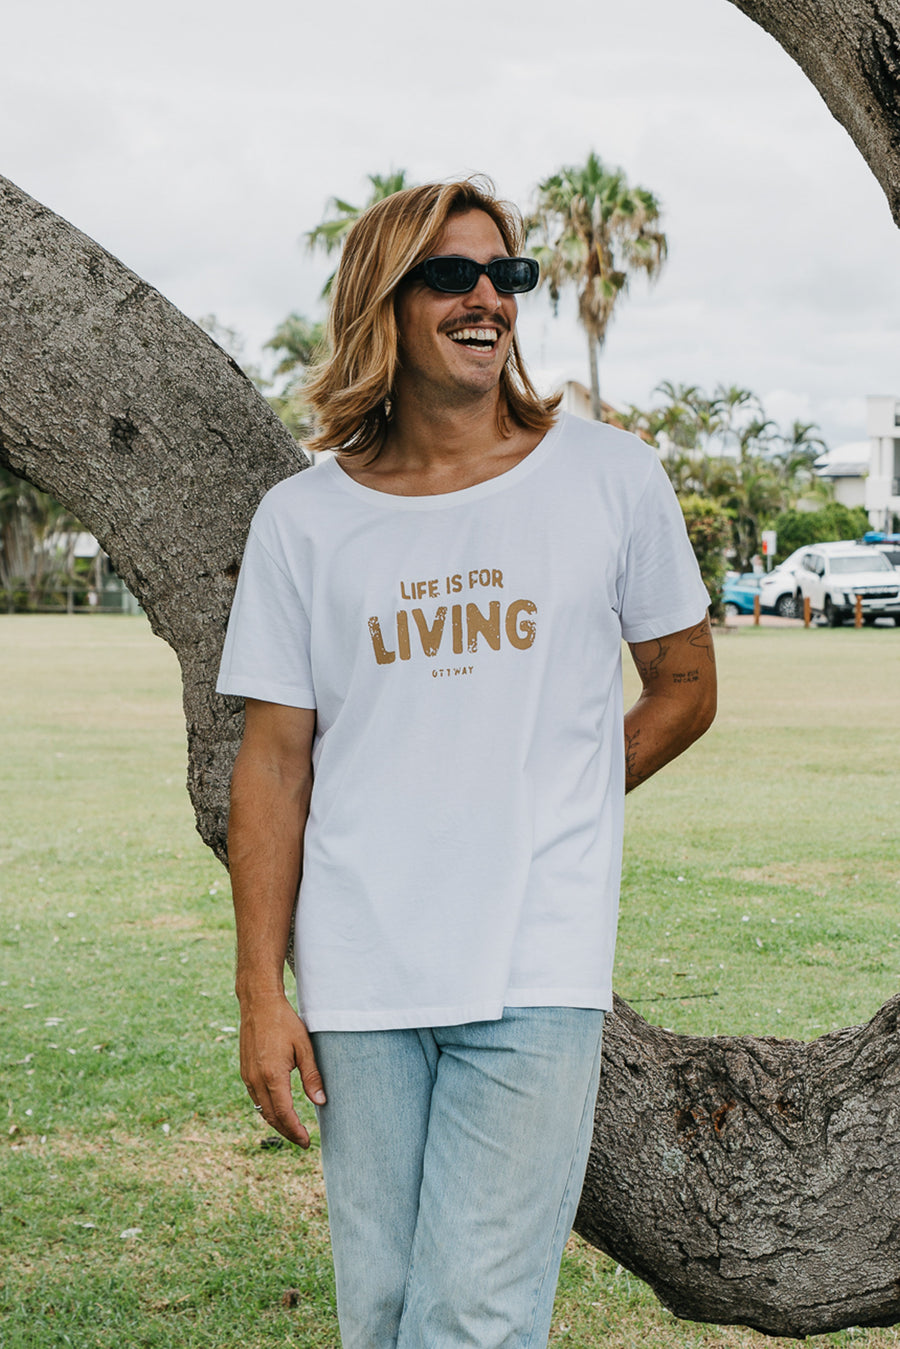 Life is for Living T-Shirt - White